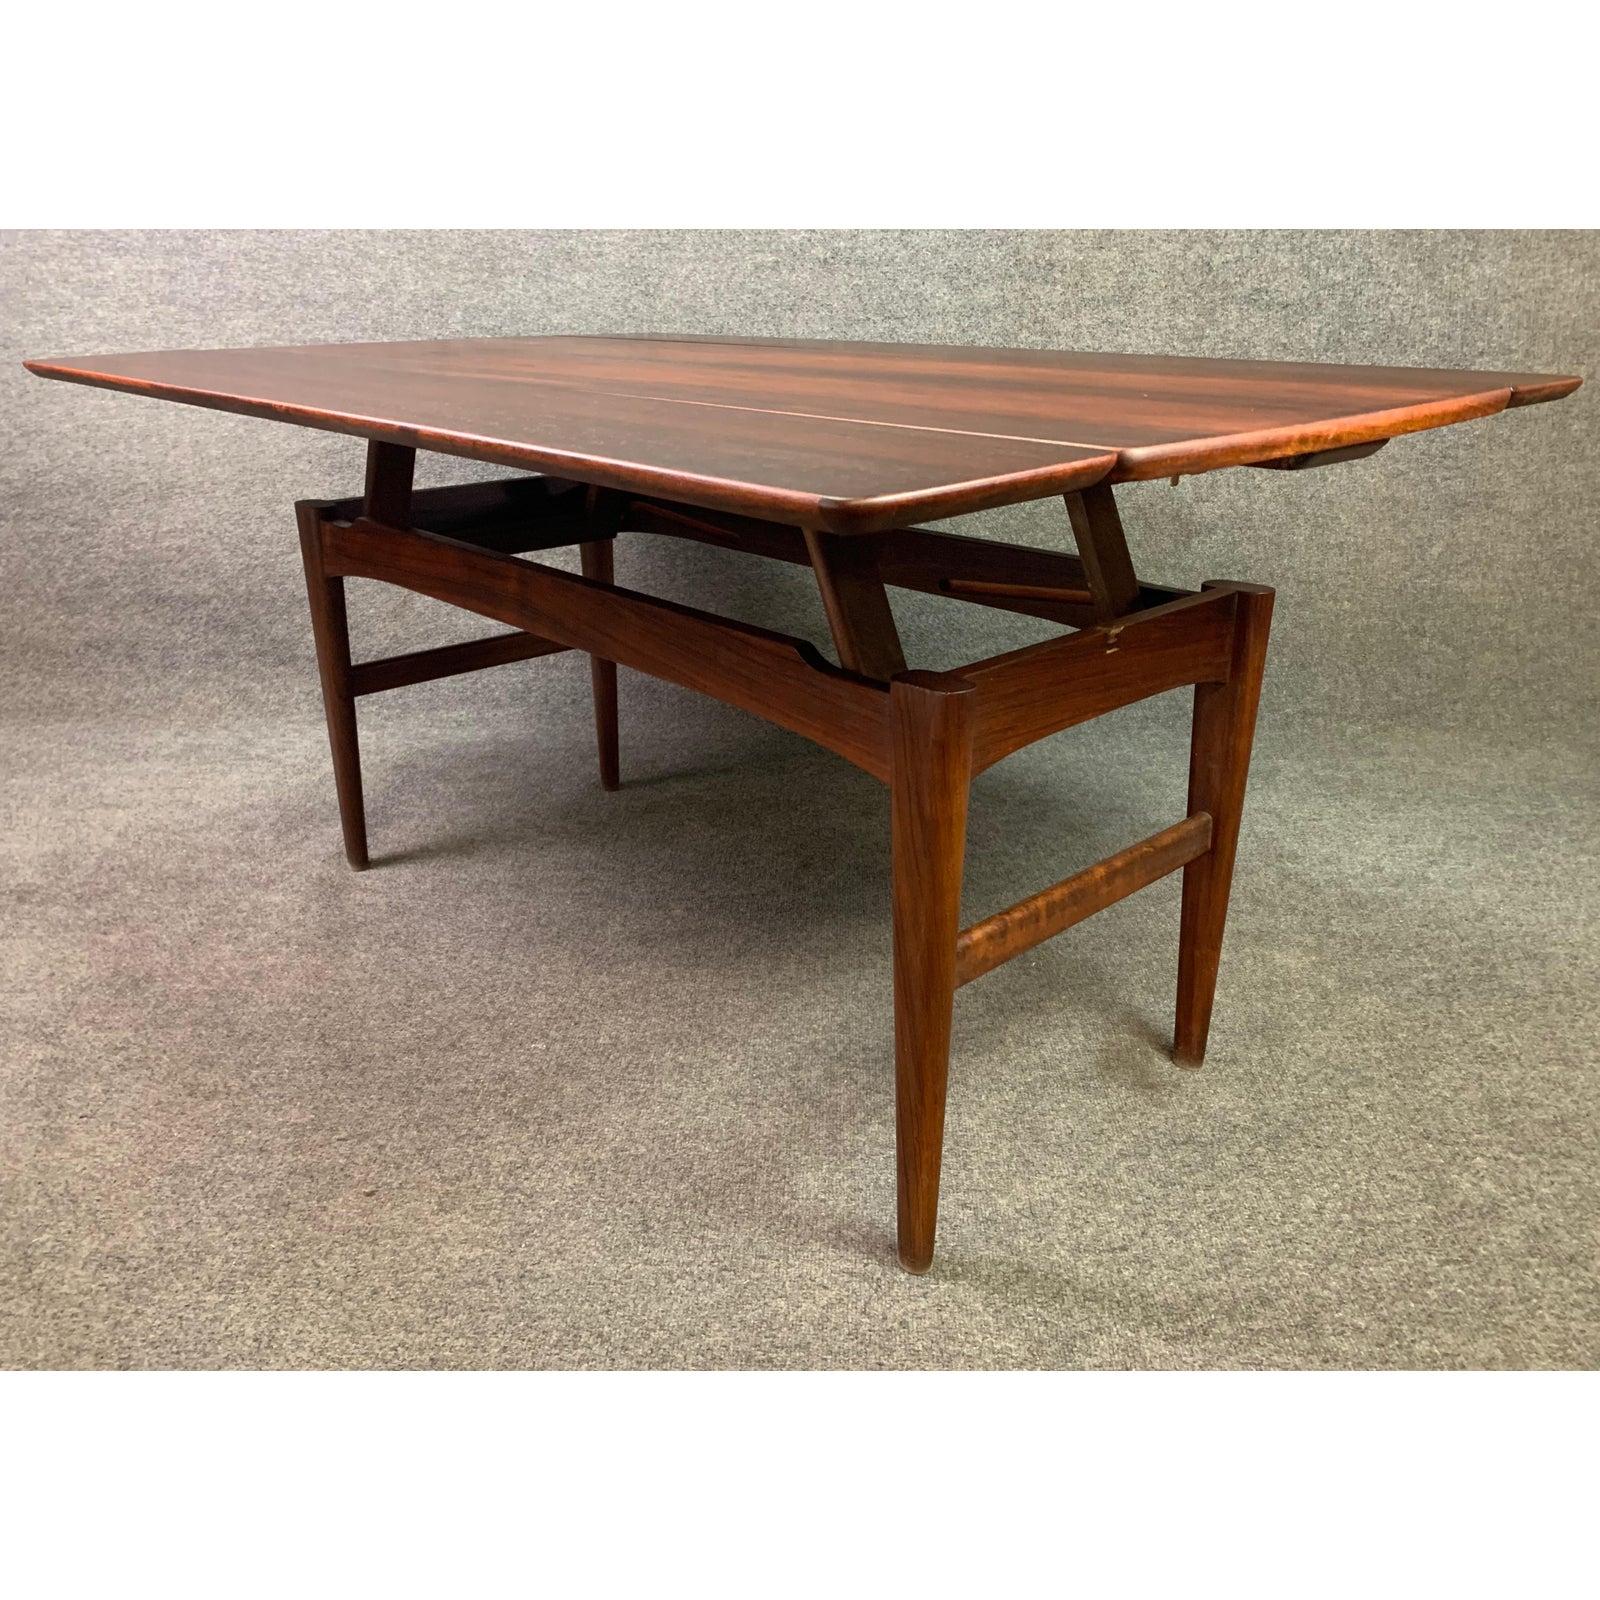 Mid-20th Century RESERVED FOR NOA: Vintage Danish Mid-Century Modern Rosewood Elevator Table